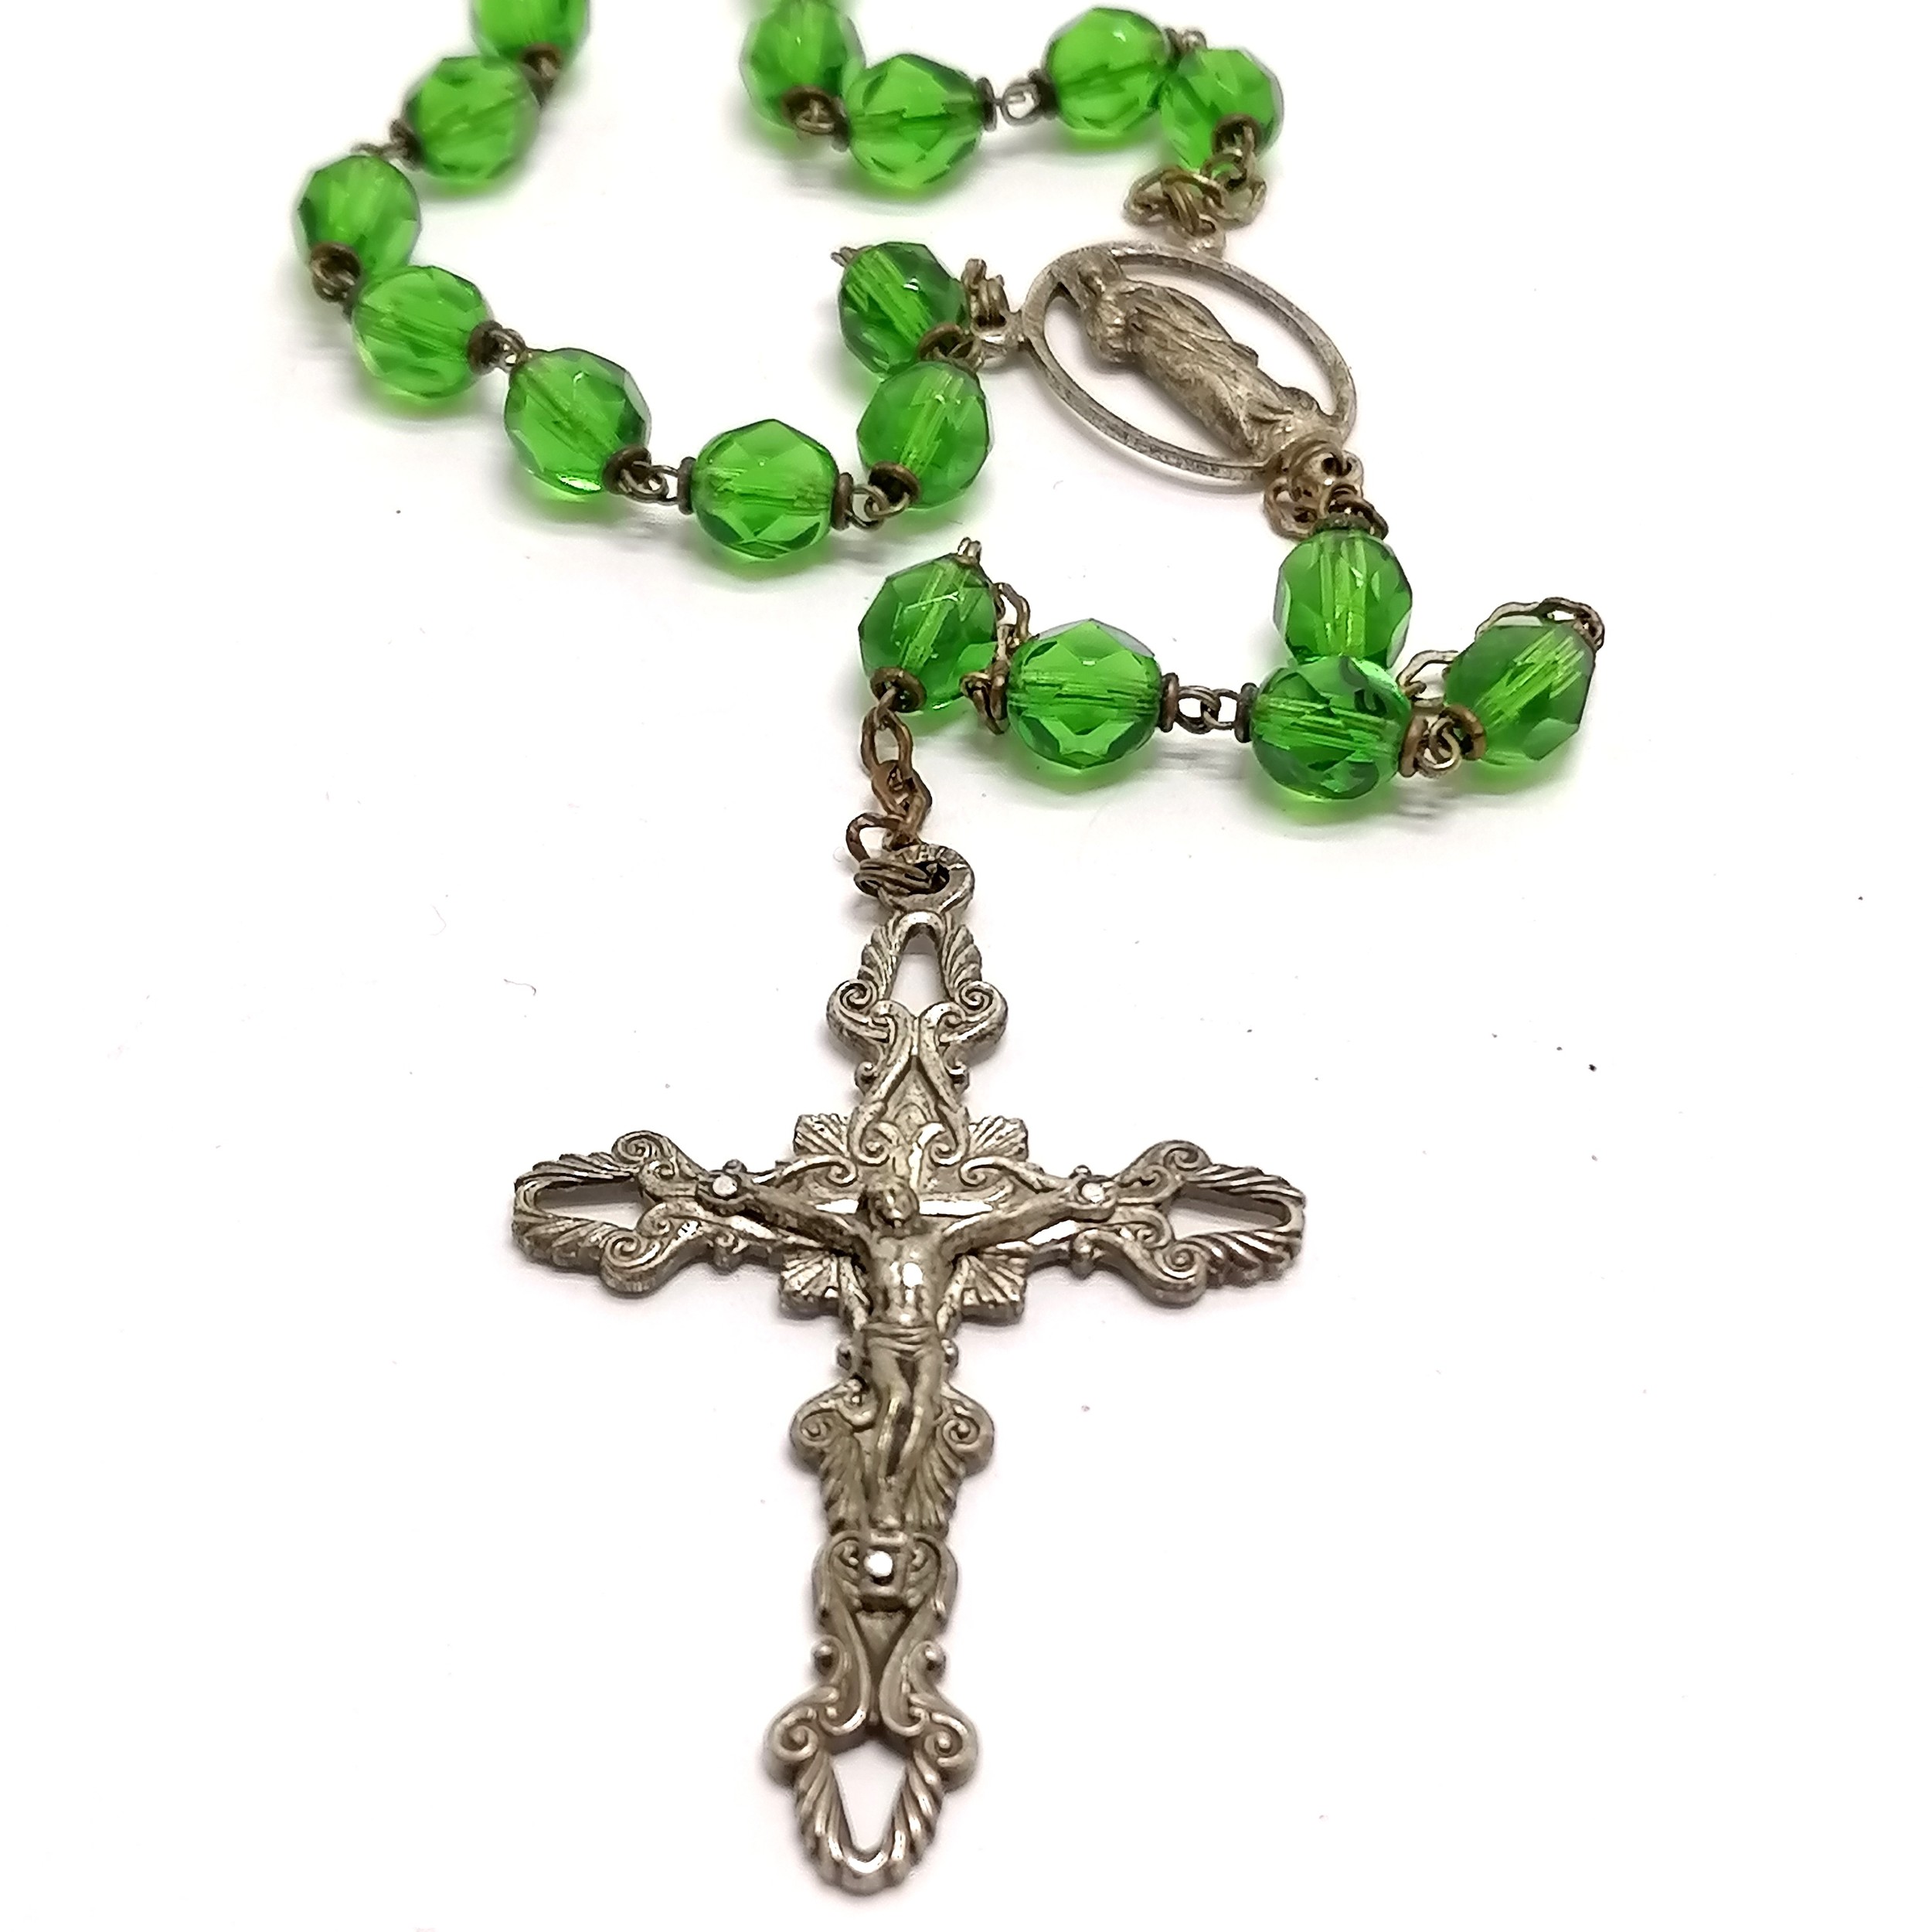 2 x rosaries inc green glass beads & 1 with reliquary (60cm long + 17cm crucifix drop) - Image 2 of 2